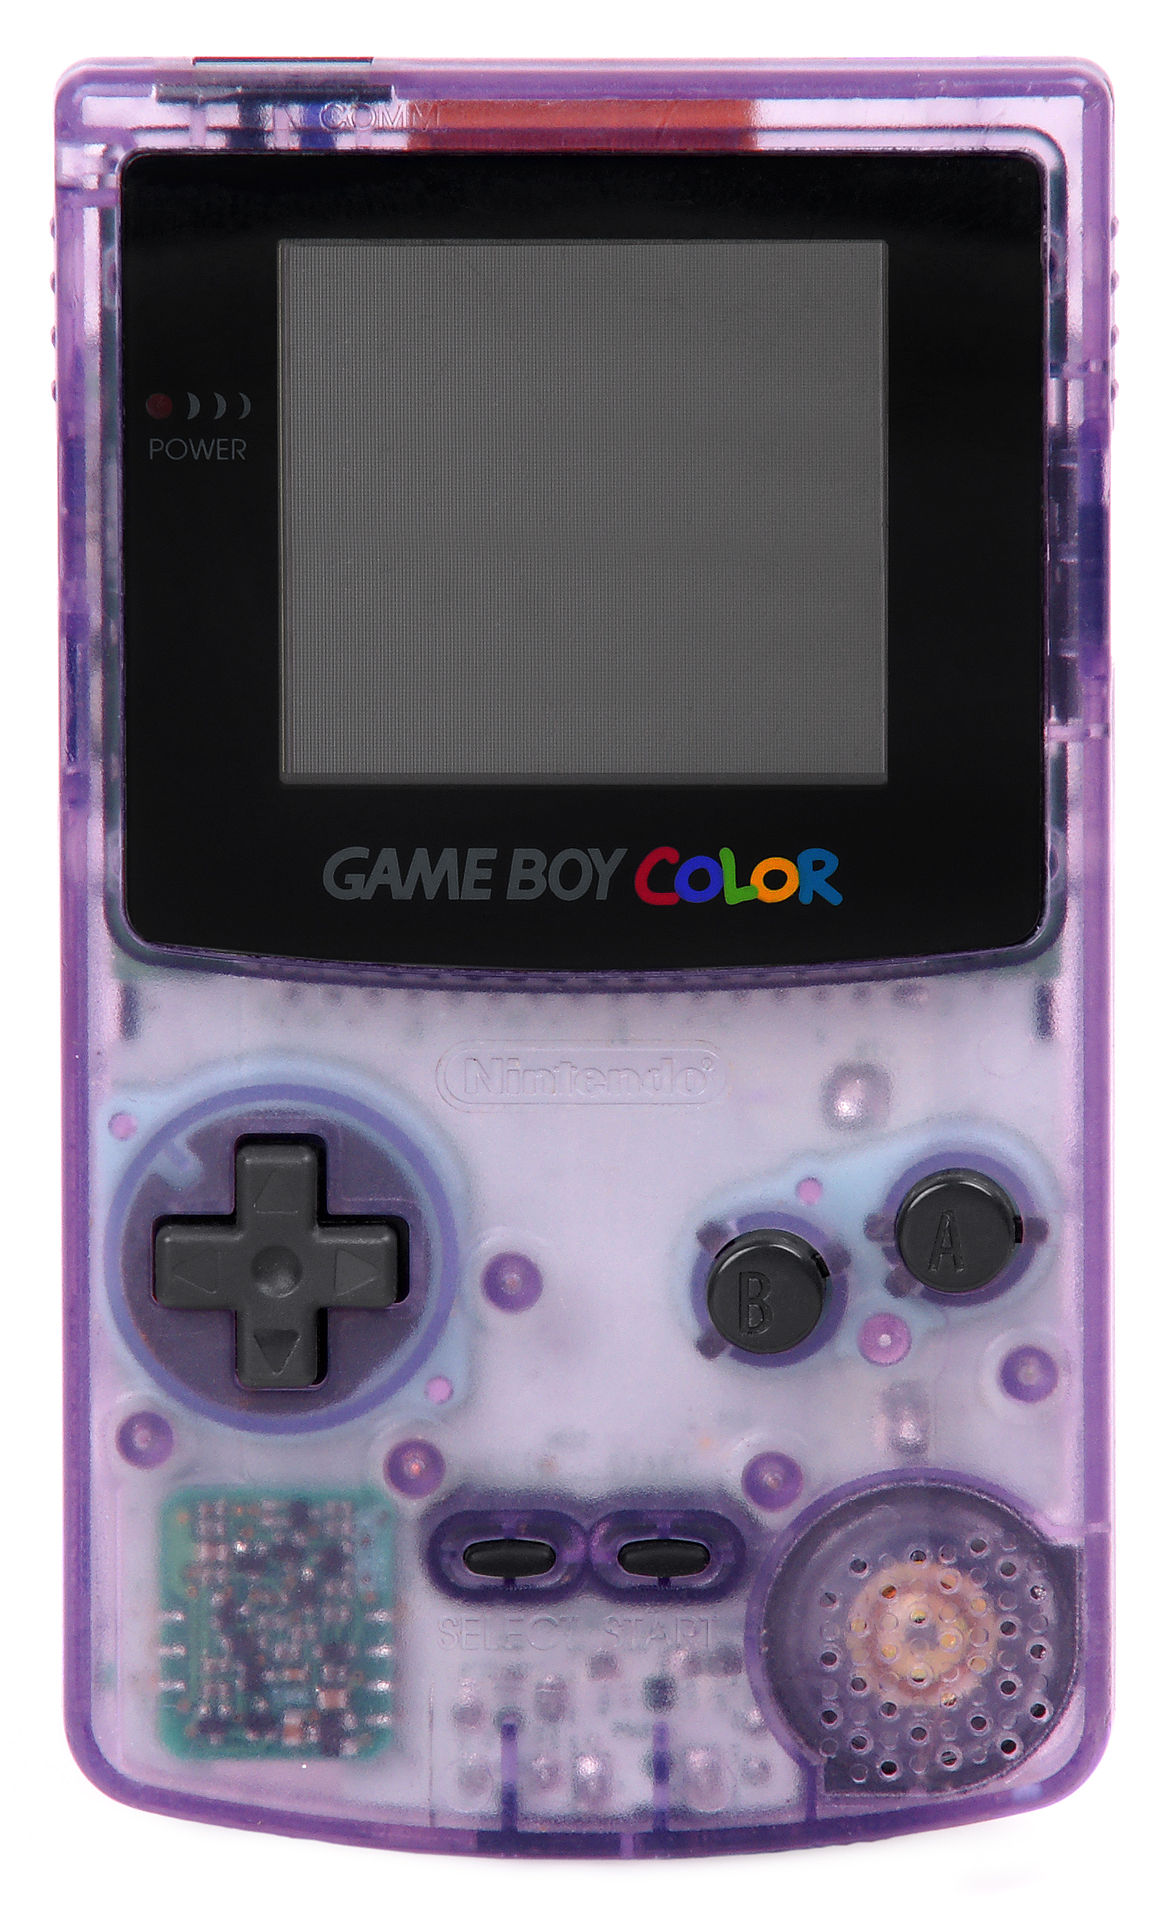 http://upload.wikimedia.org/wikipedia/commons/thumb/f/f9/Game-Boy-Color-Purple.jpg/1176px-Game-Boy-Color-Purple.jpg